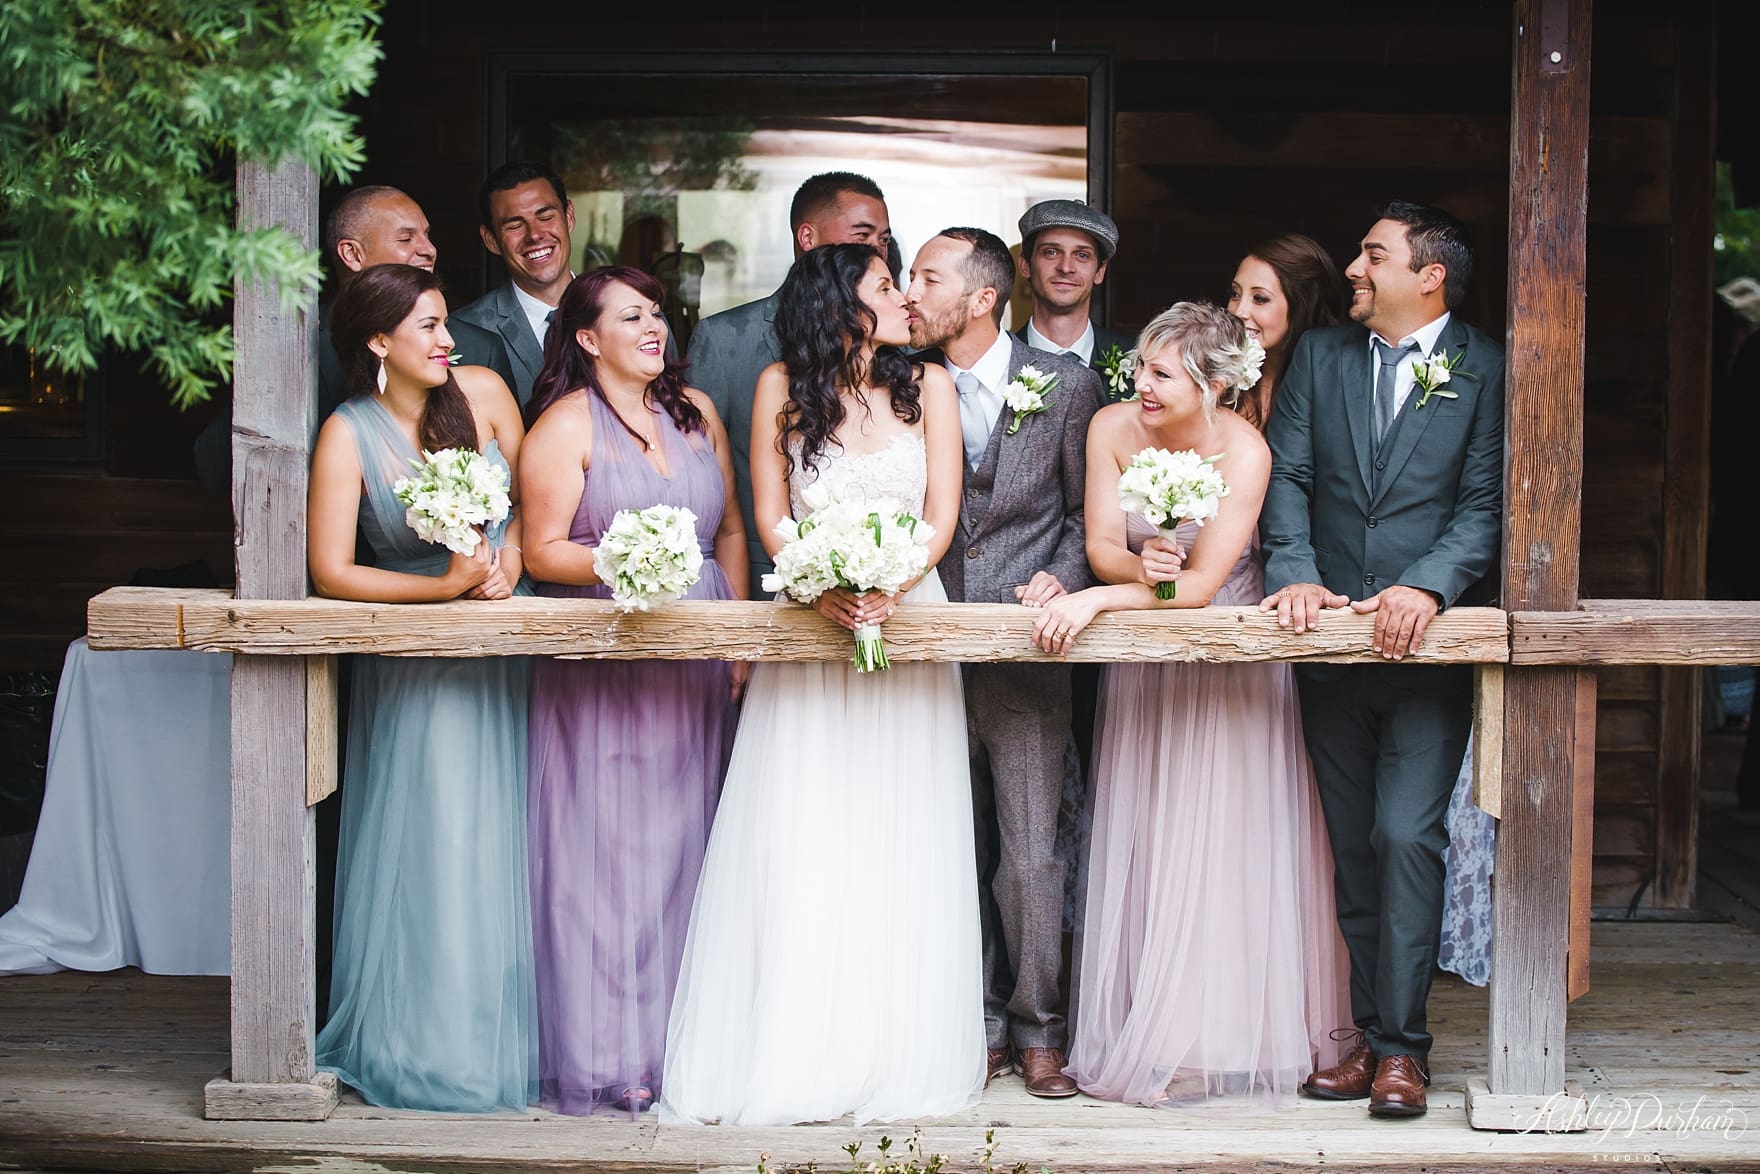 Green mountain ranch weddings, multicolored bridesmaid dresses, tulle wedding dress, tulle bridesmaid dresses